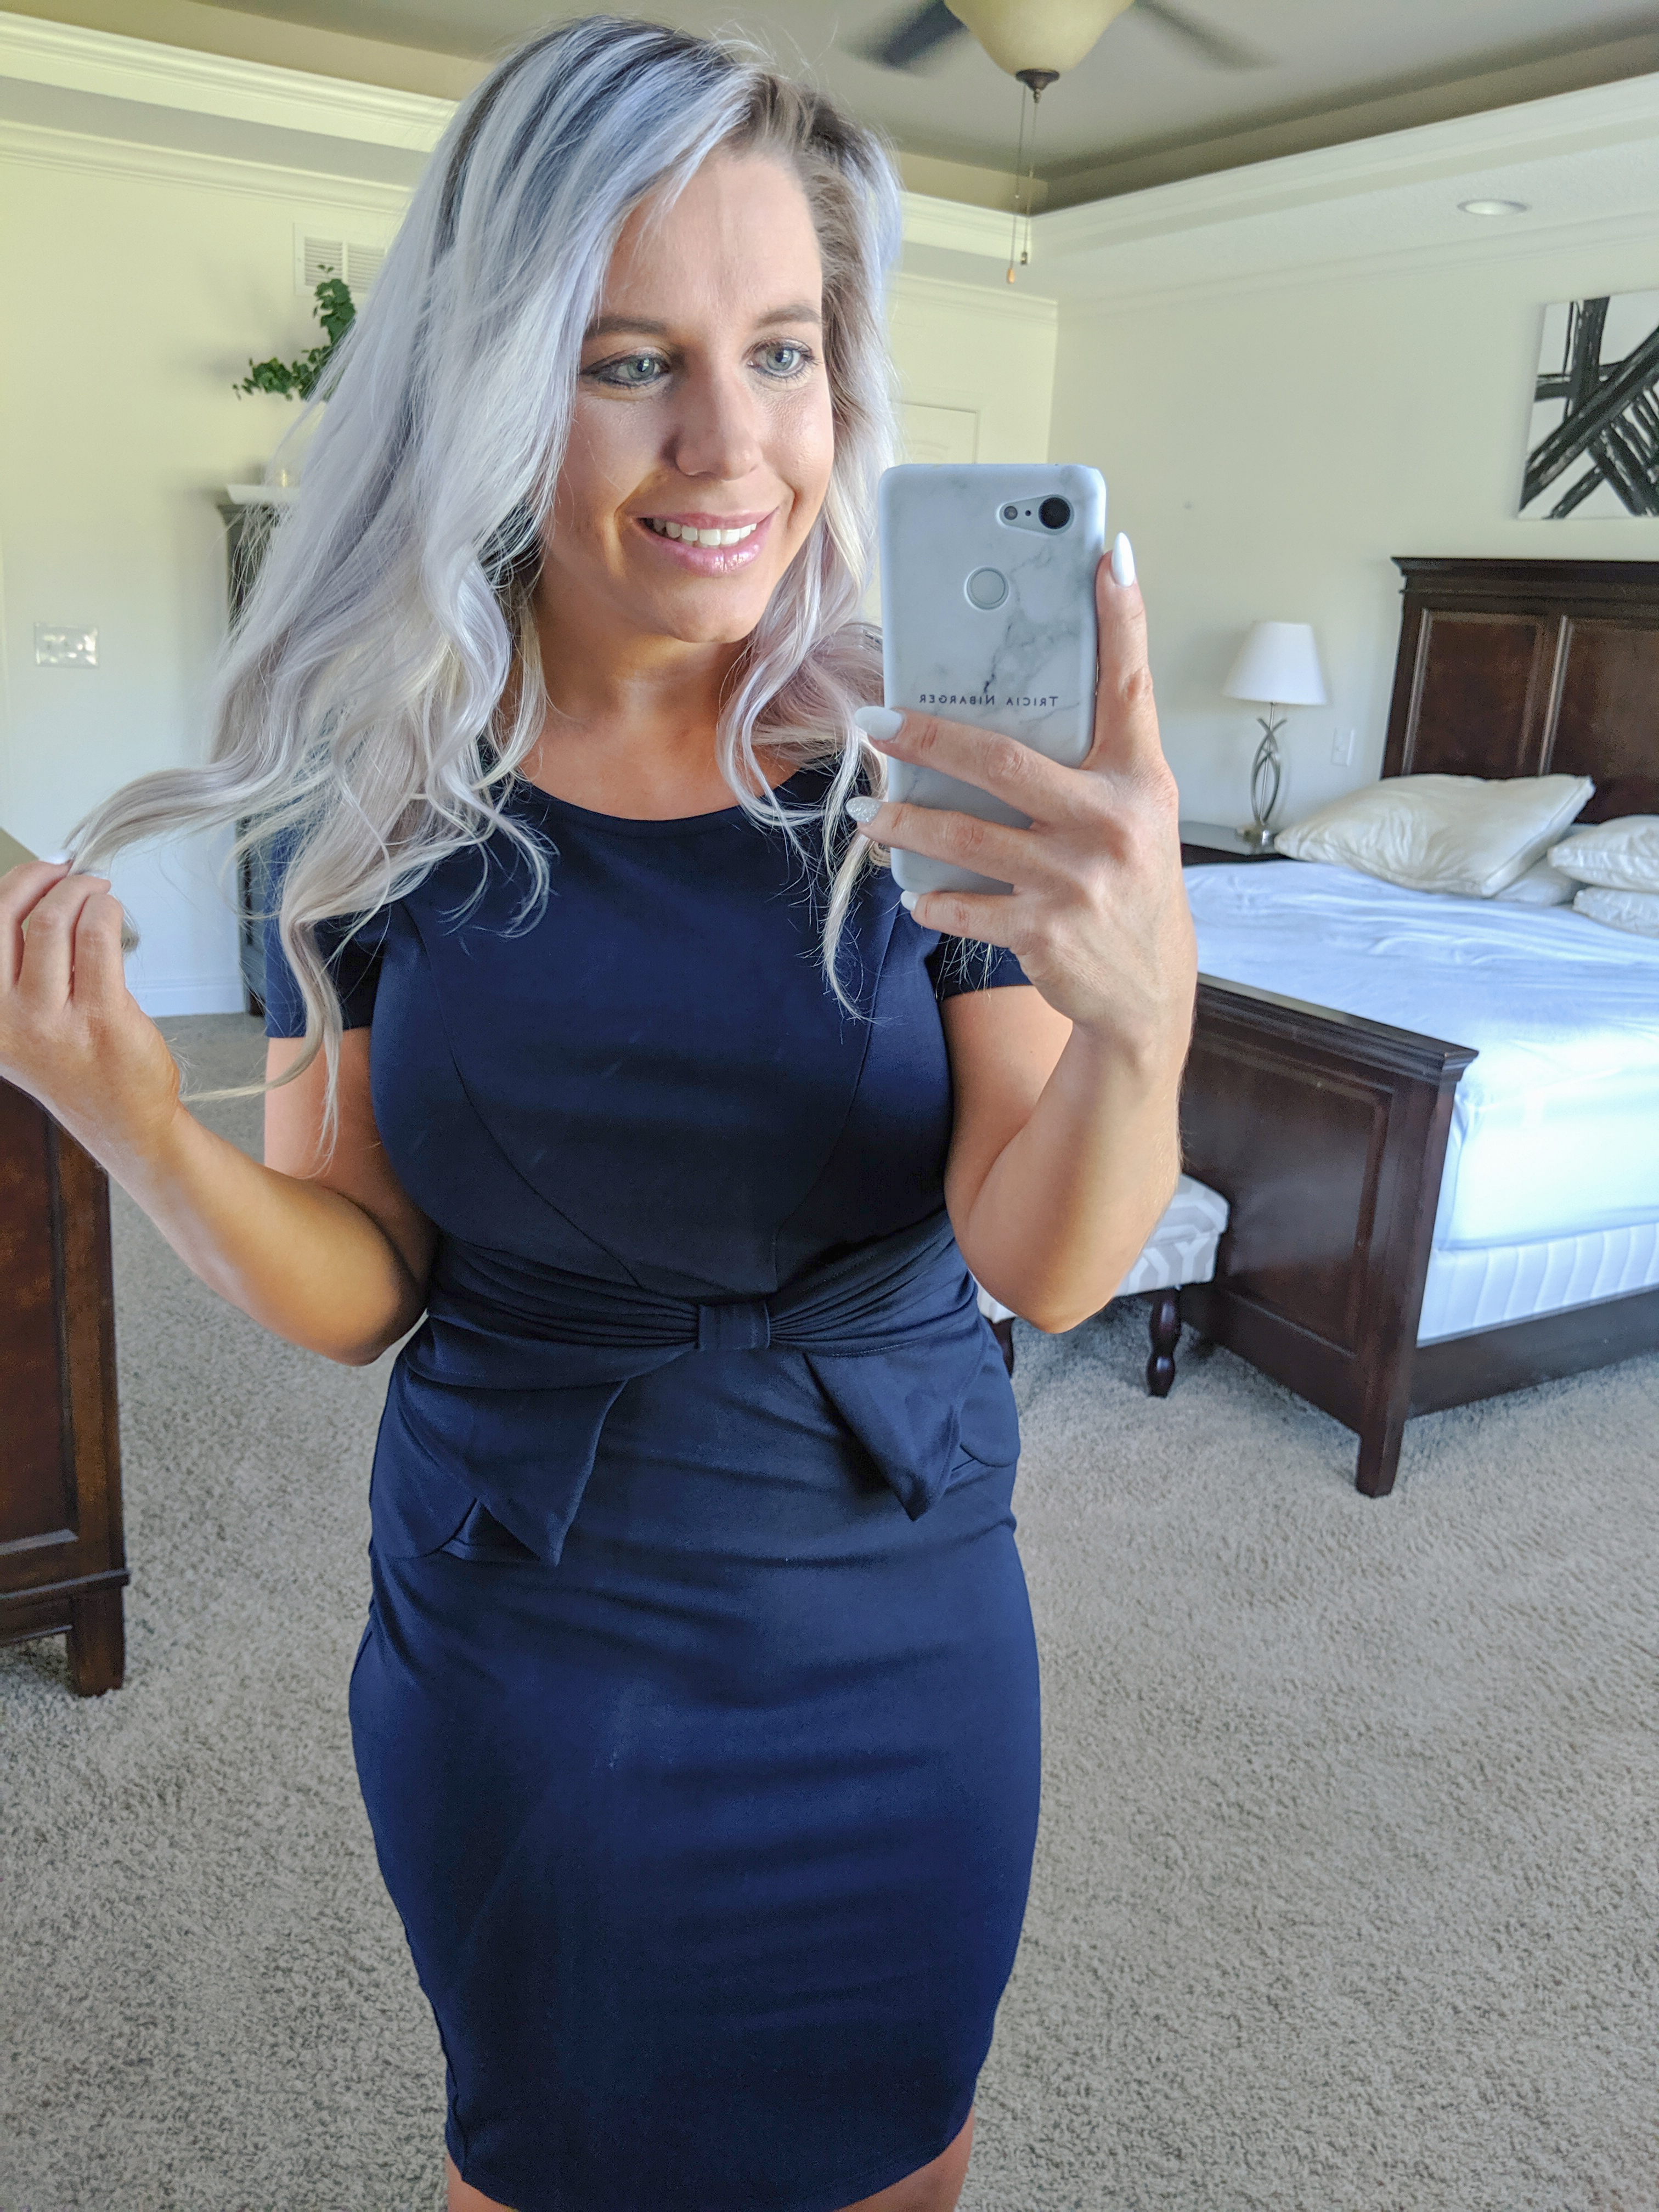 If you have an office job, you NEED to check out this try-on haul! Fashion blogger Tricia Nibarger shows the best work dresses on Amazon 2019. All dresses are budget-friendly and work appropriate. #tryon #amazonfinds #haul #workwear 